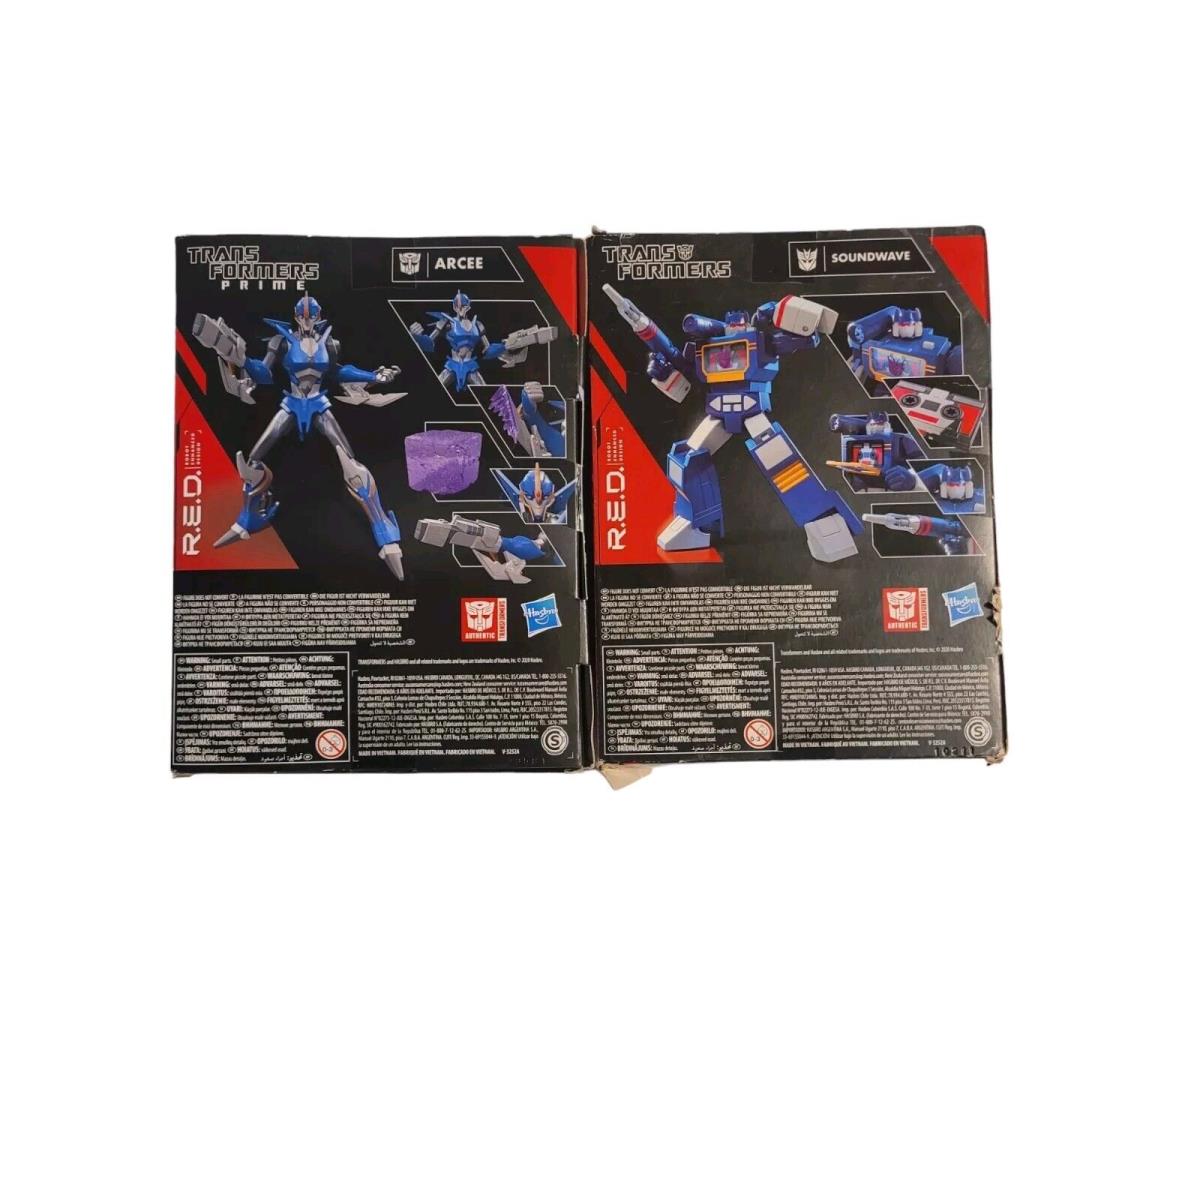 Hasbro Transformers R.e.d. Series Soundwave and Arcee Action Figures Toys Gift